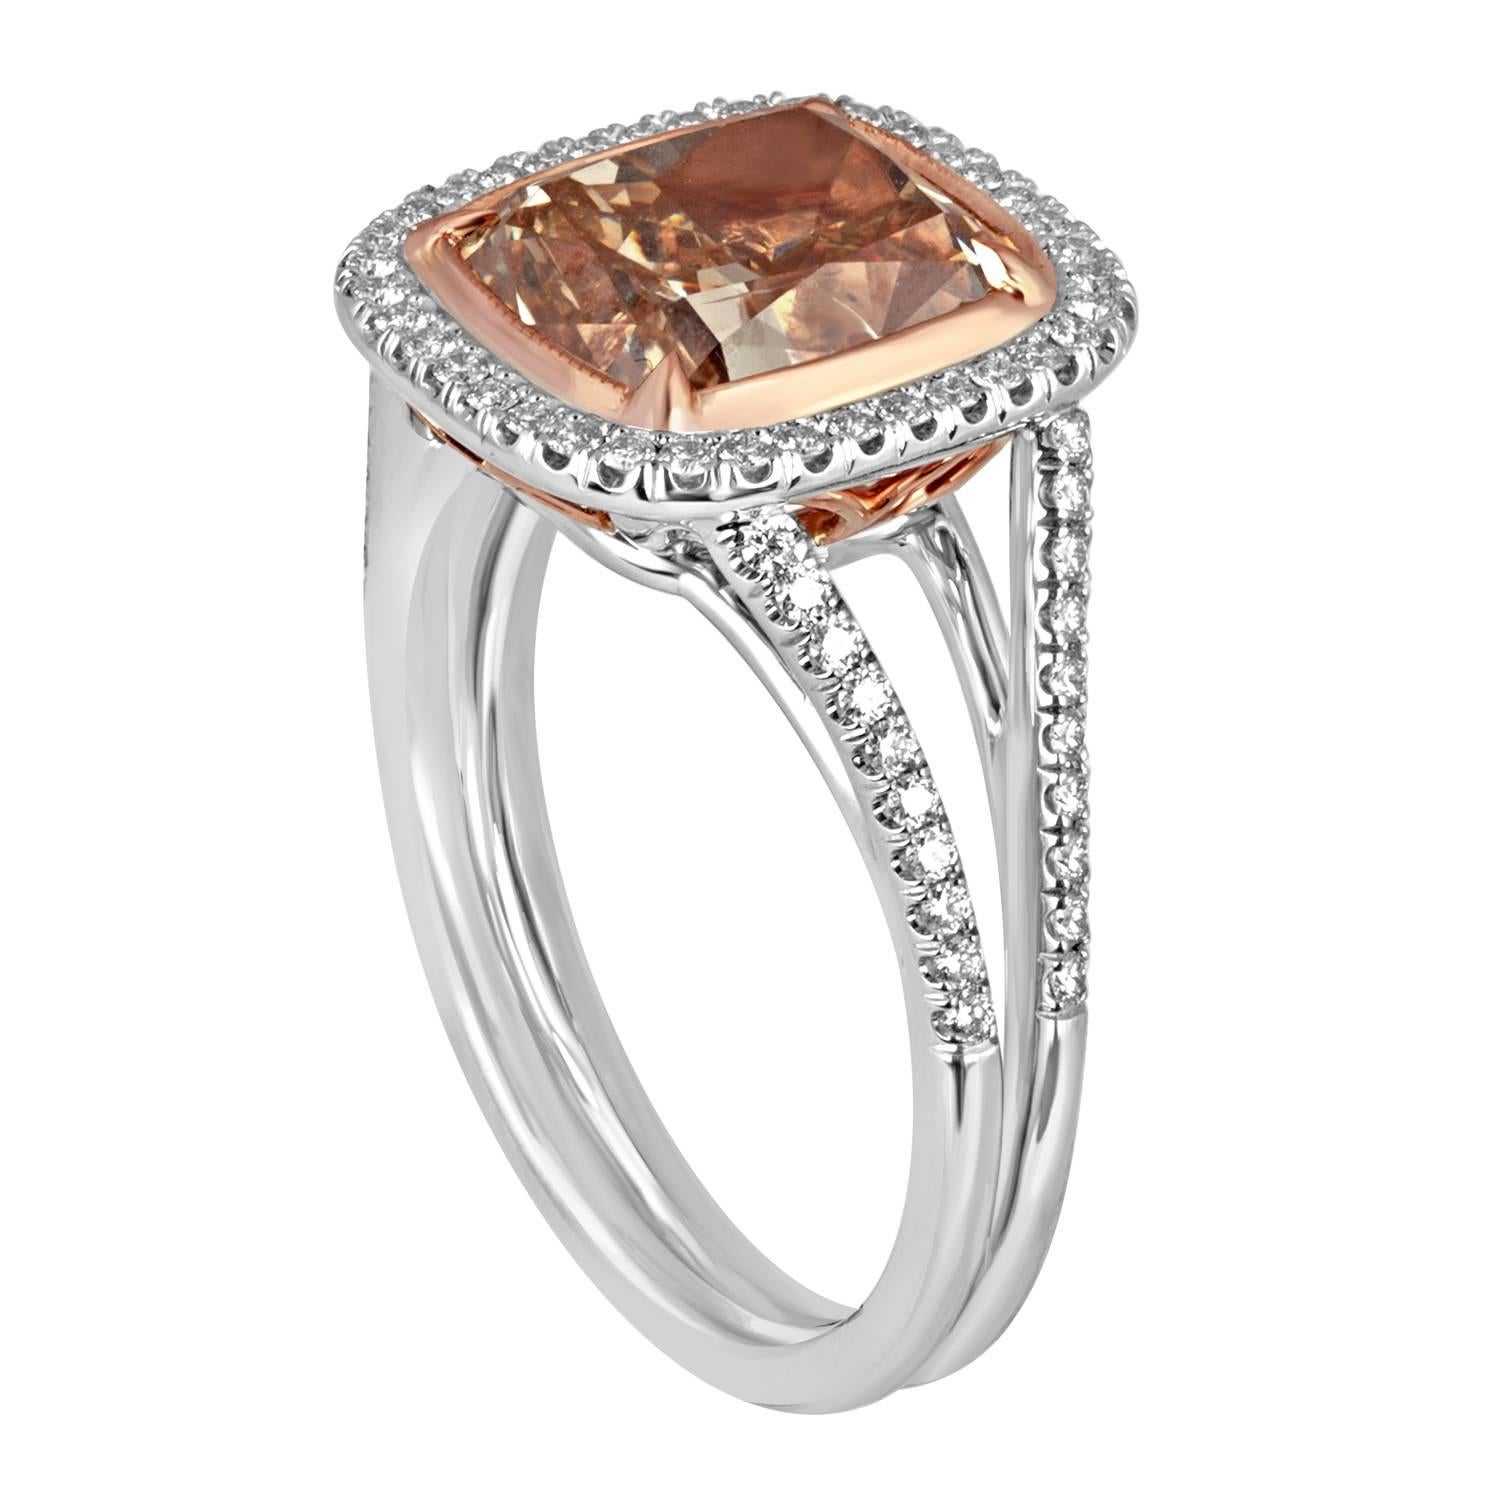 A Beautiful 4.01 Carat Cushion Cut Diamond, EGL Certified as Fancy Deep Brown Orange in Color and SI2 in Clarity is set in Platinum and Rose Gold Mounting. 0.30 Carat Total Weight Round Brilliant White Diamonds are set around the center in Two Rows